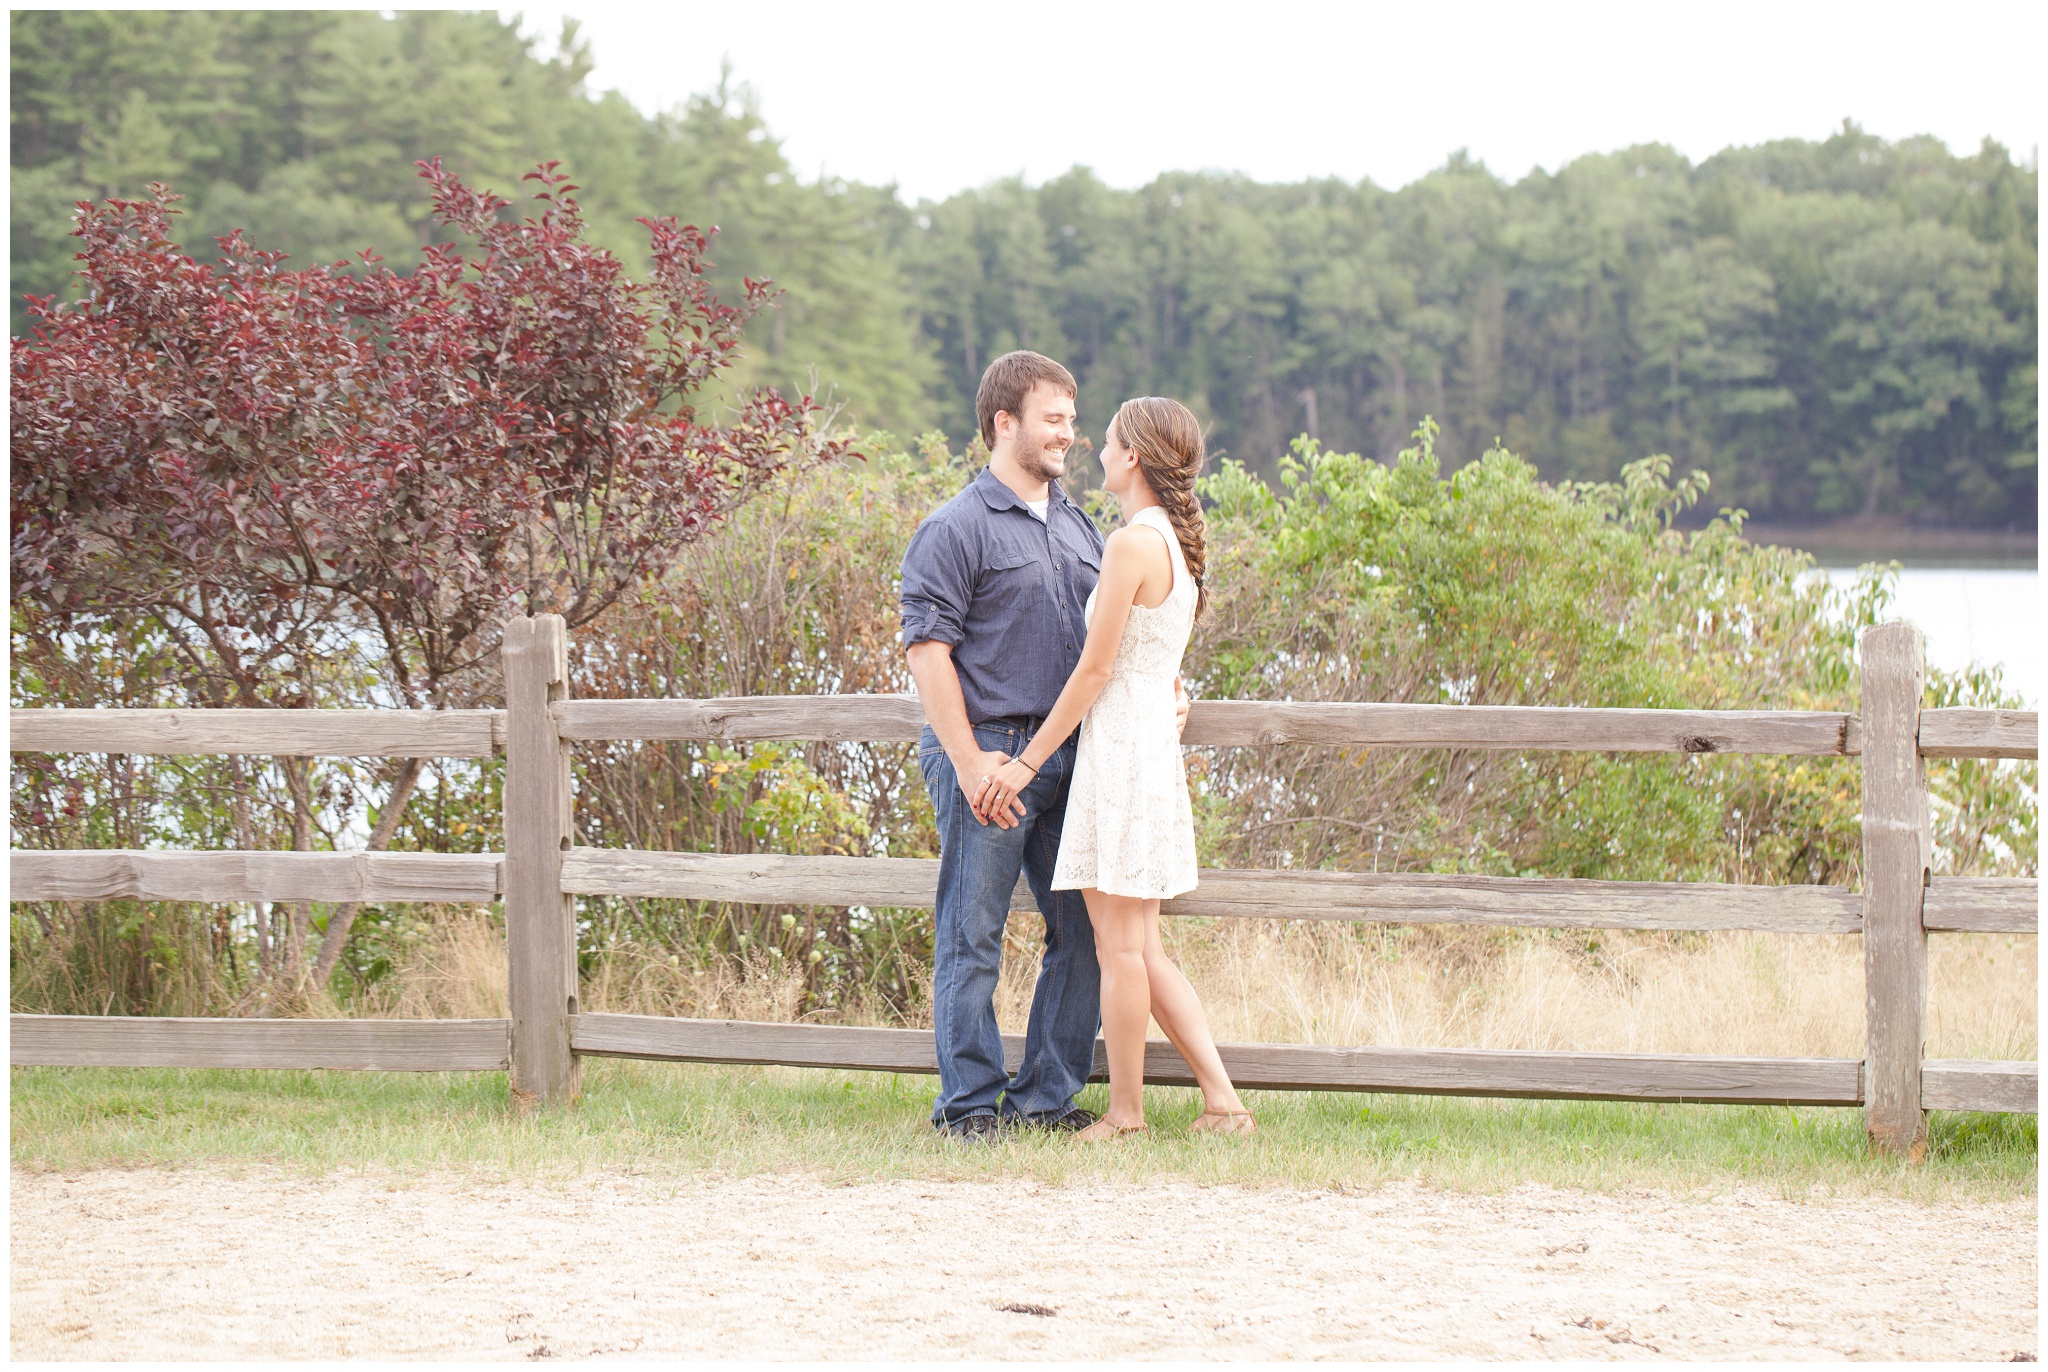 exeter new hampshire wedding photography | Wagon Hill Durham NH | Engagement Session